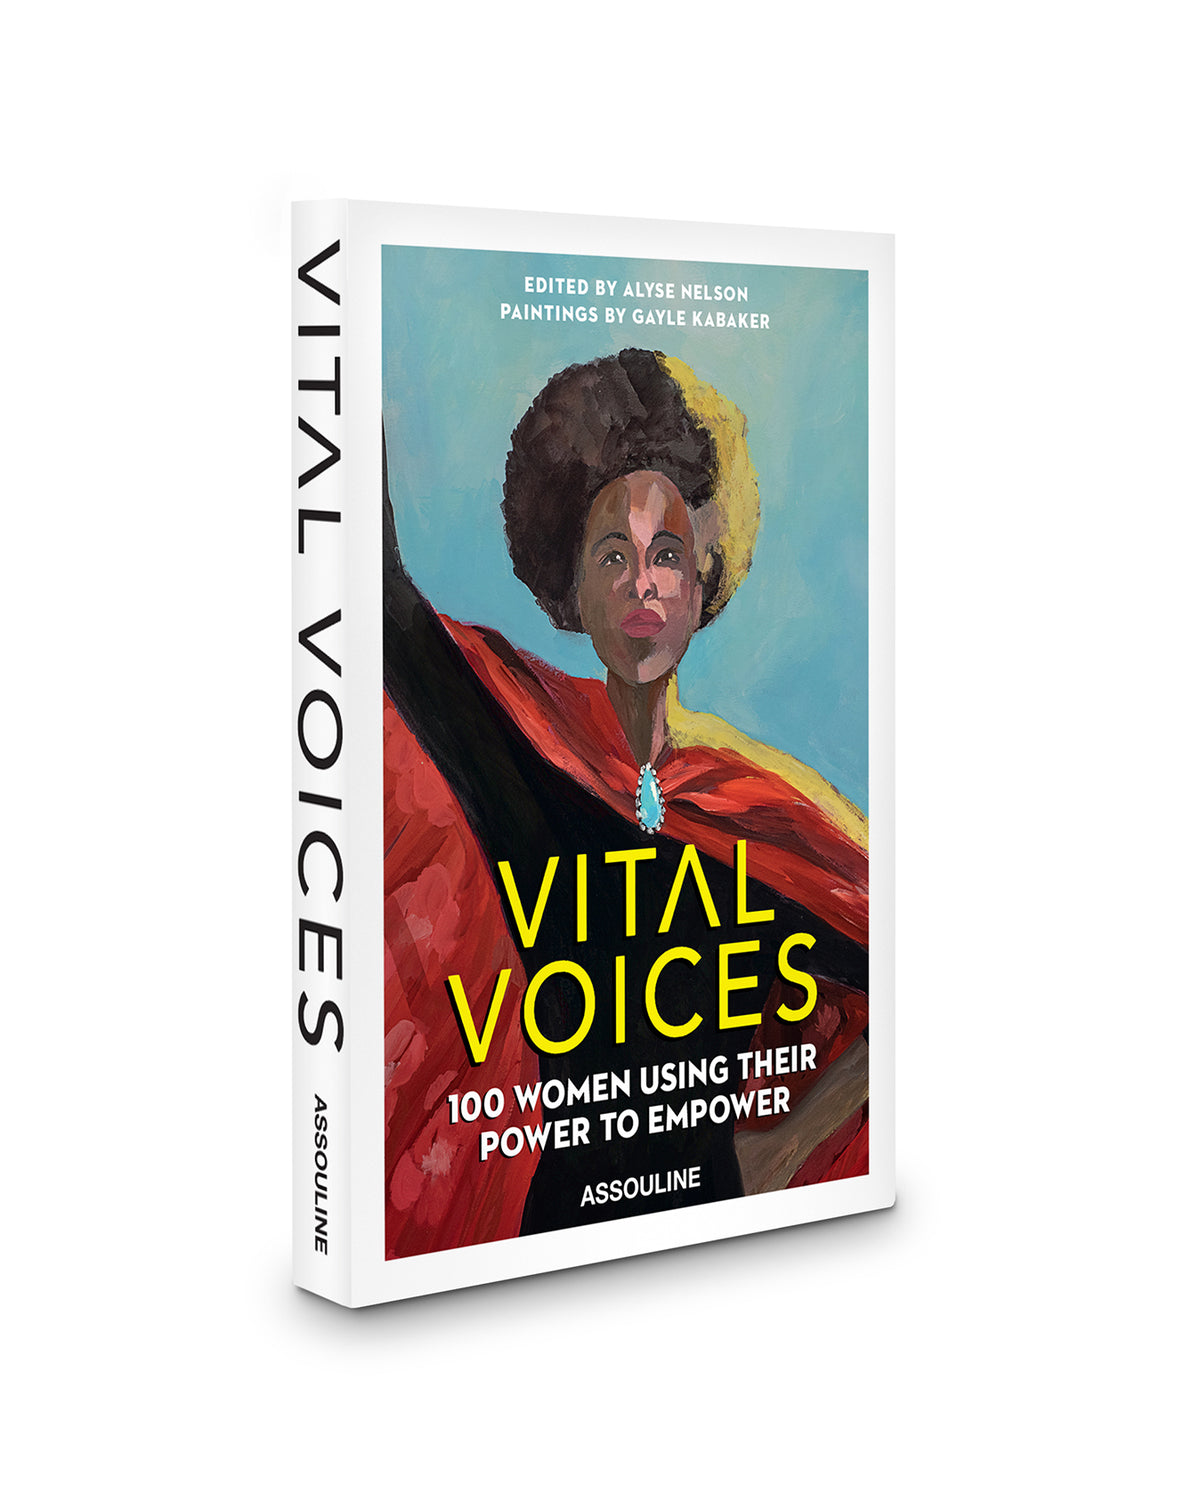 Vital Voices: 100 Women Using Their Power To Empower